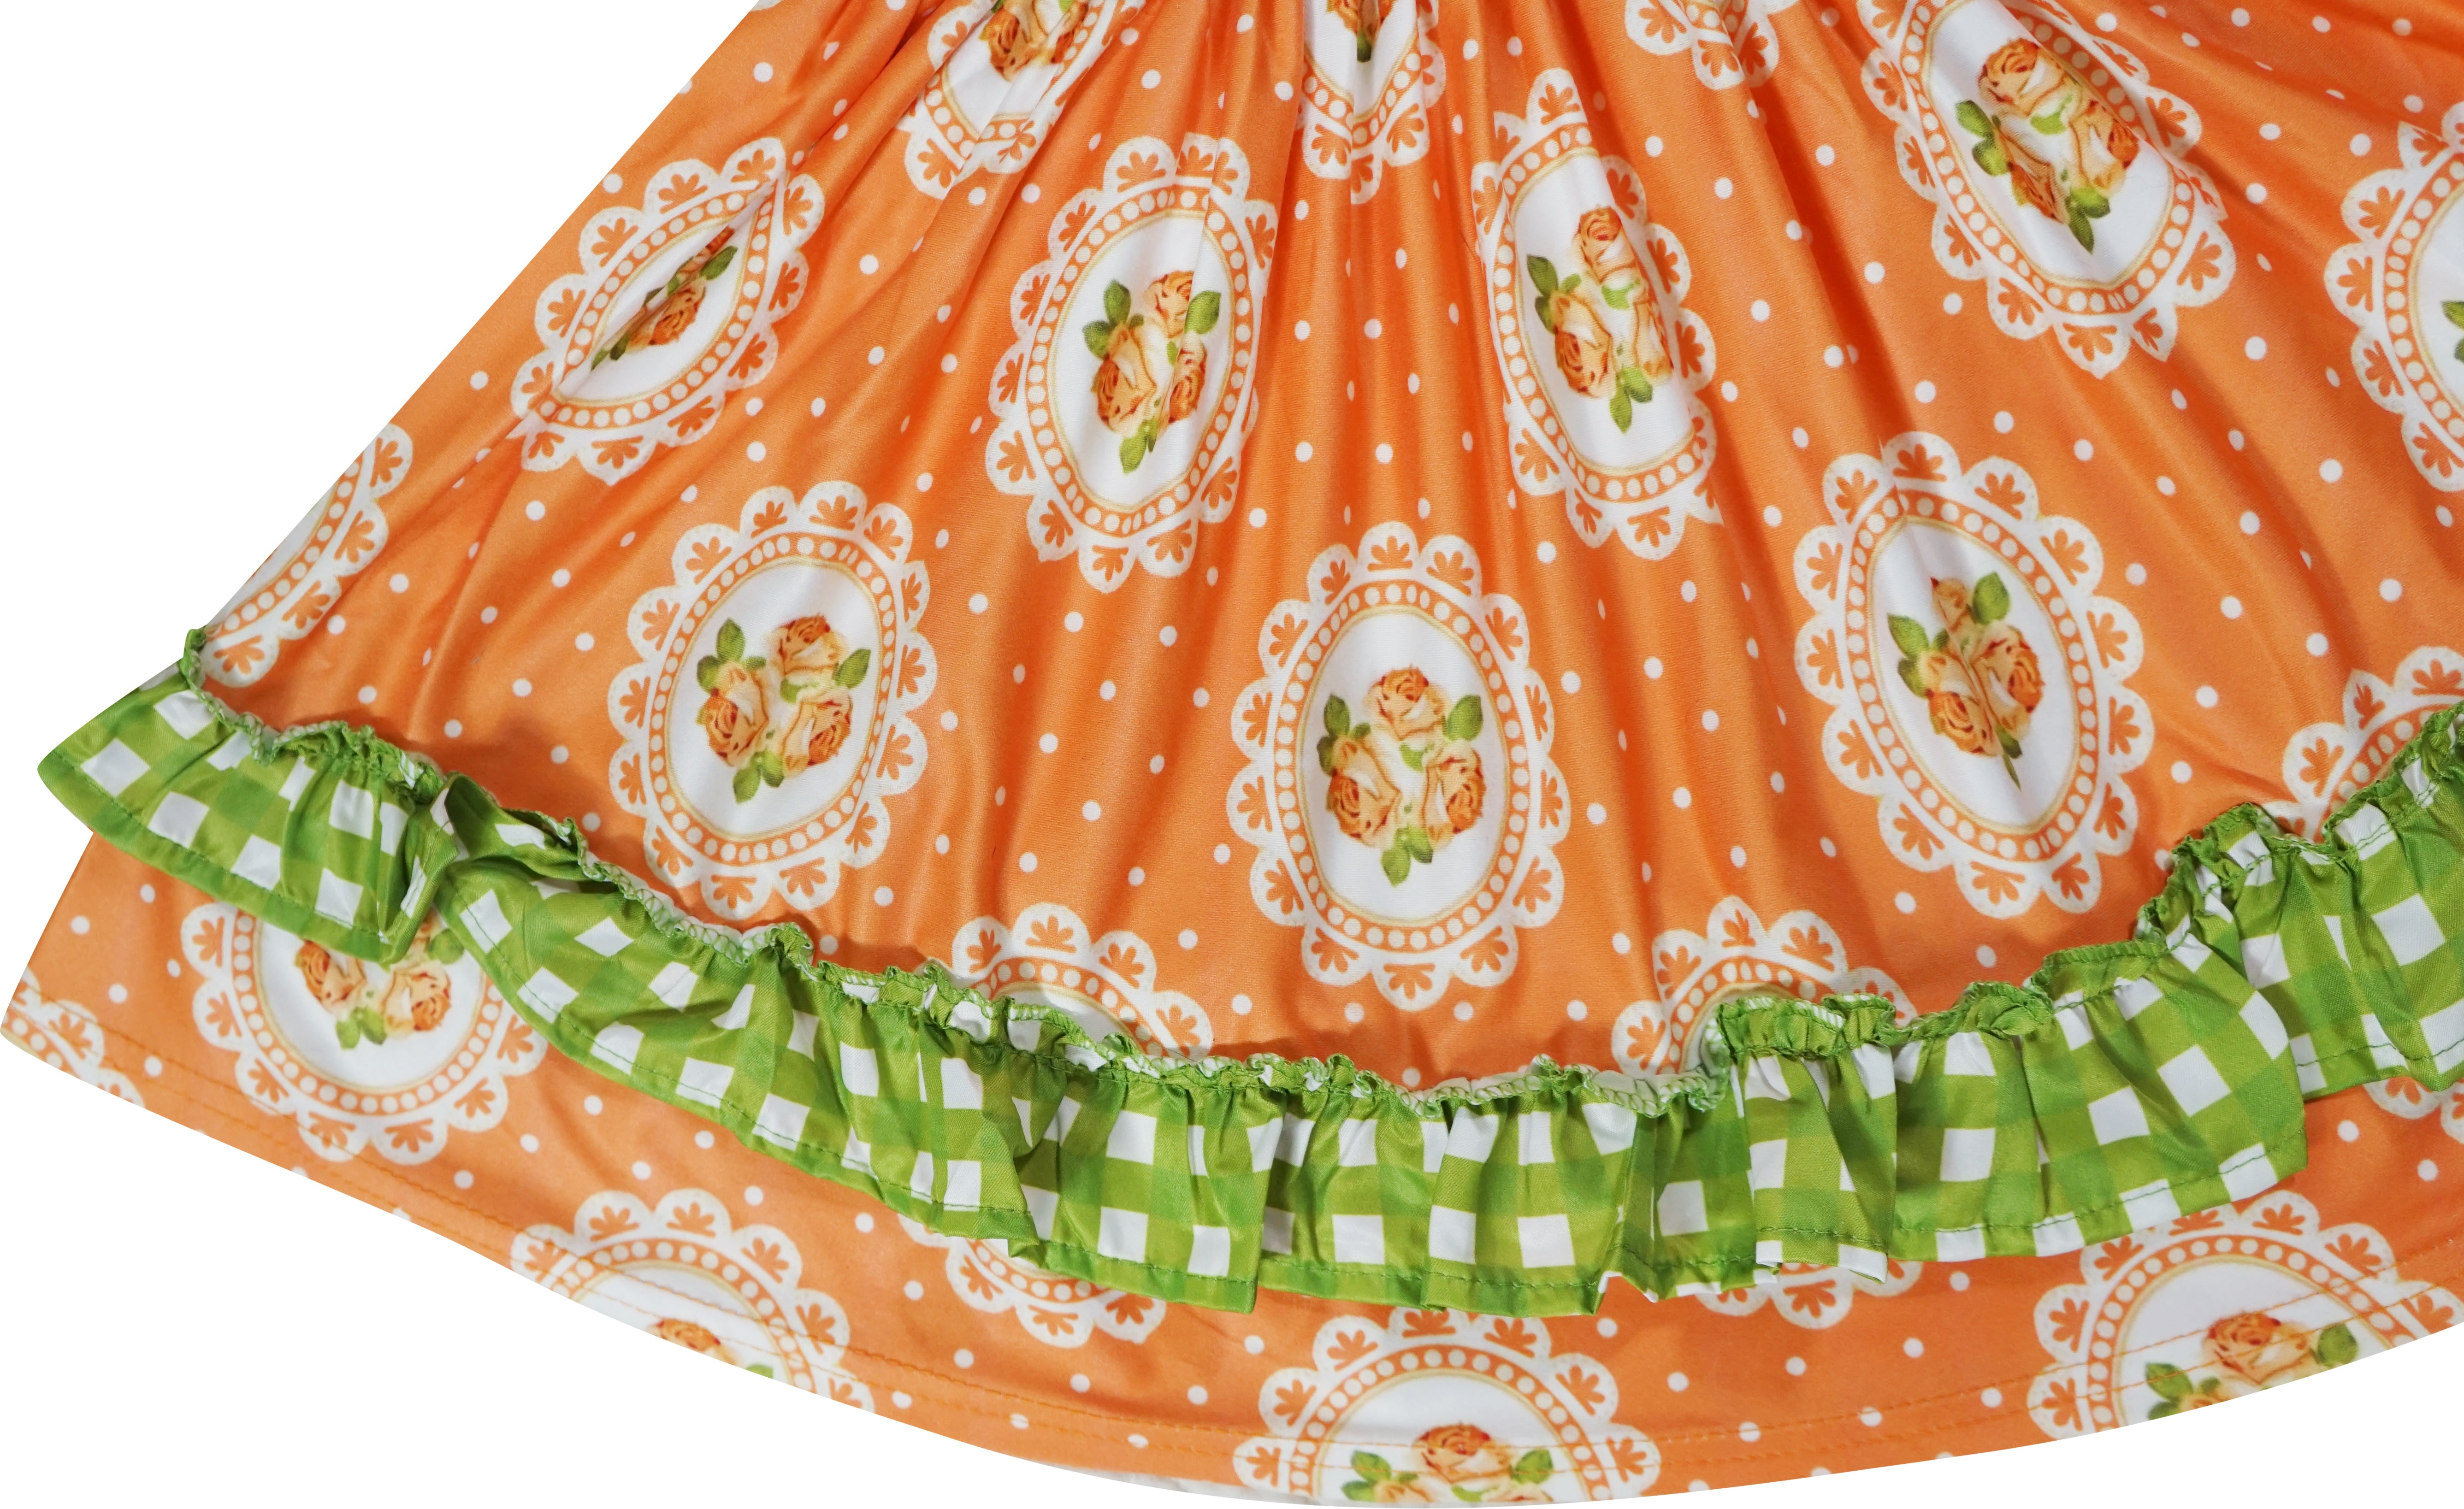 Baby Toddler Little Girls Fall Colors Pumpkin Patch Halloween Floral Dress Necklace Hair Bow - Orange Lime - Angeline Kids